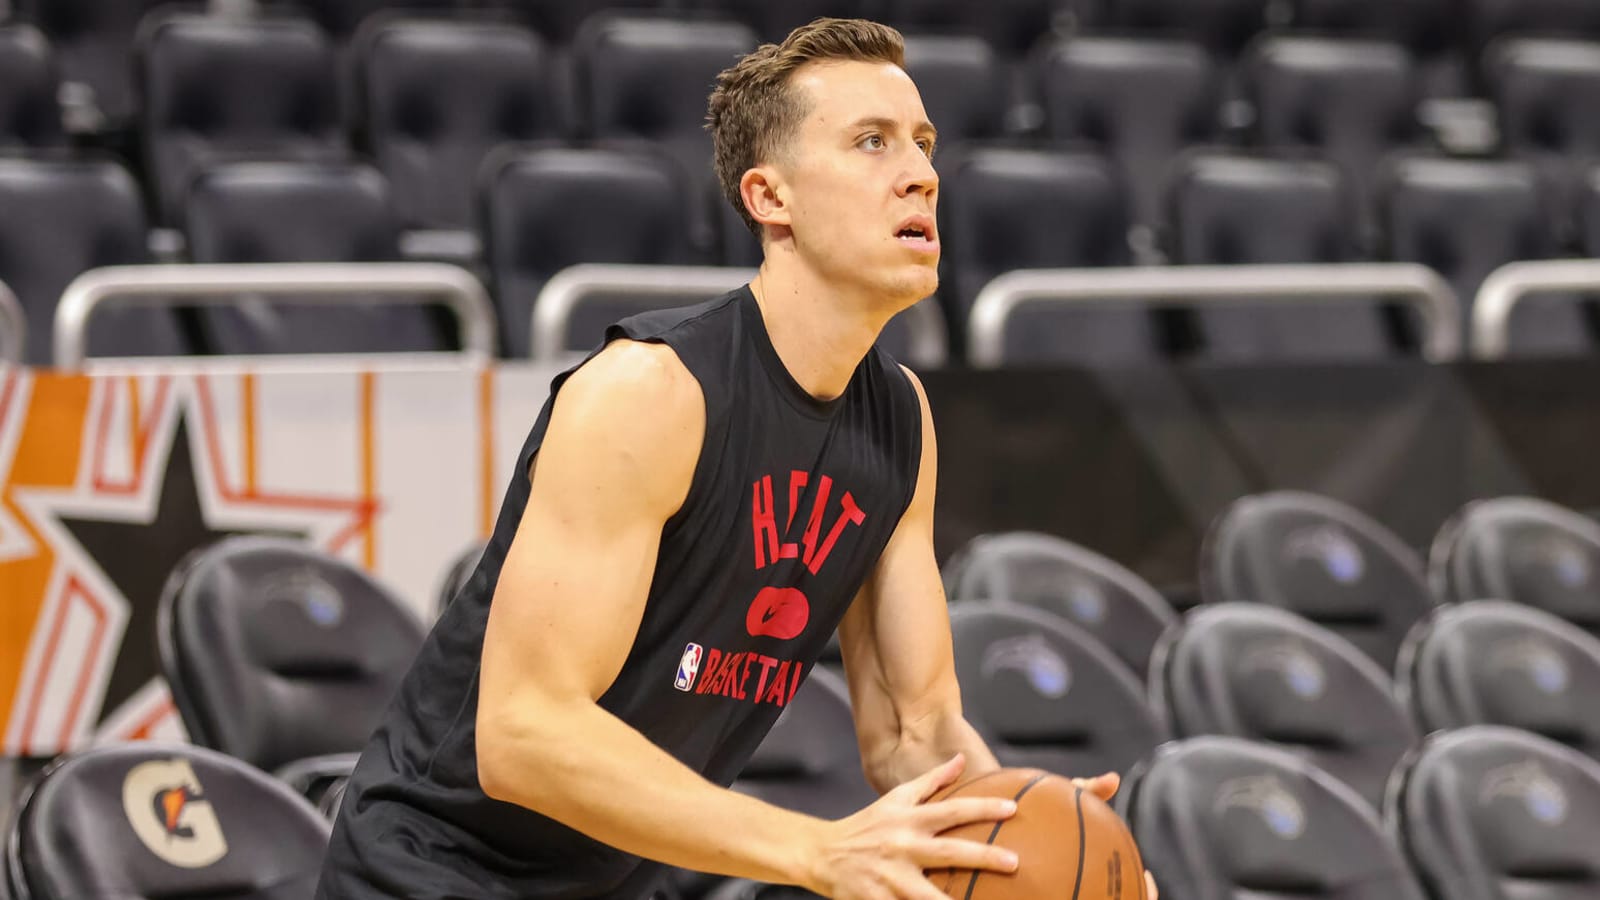 Duncan Robinson underwent nasal surgery to improve breathing